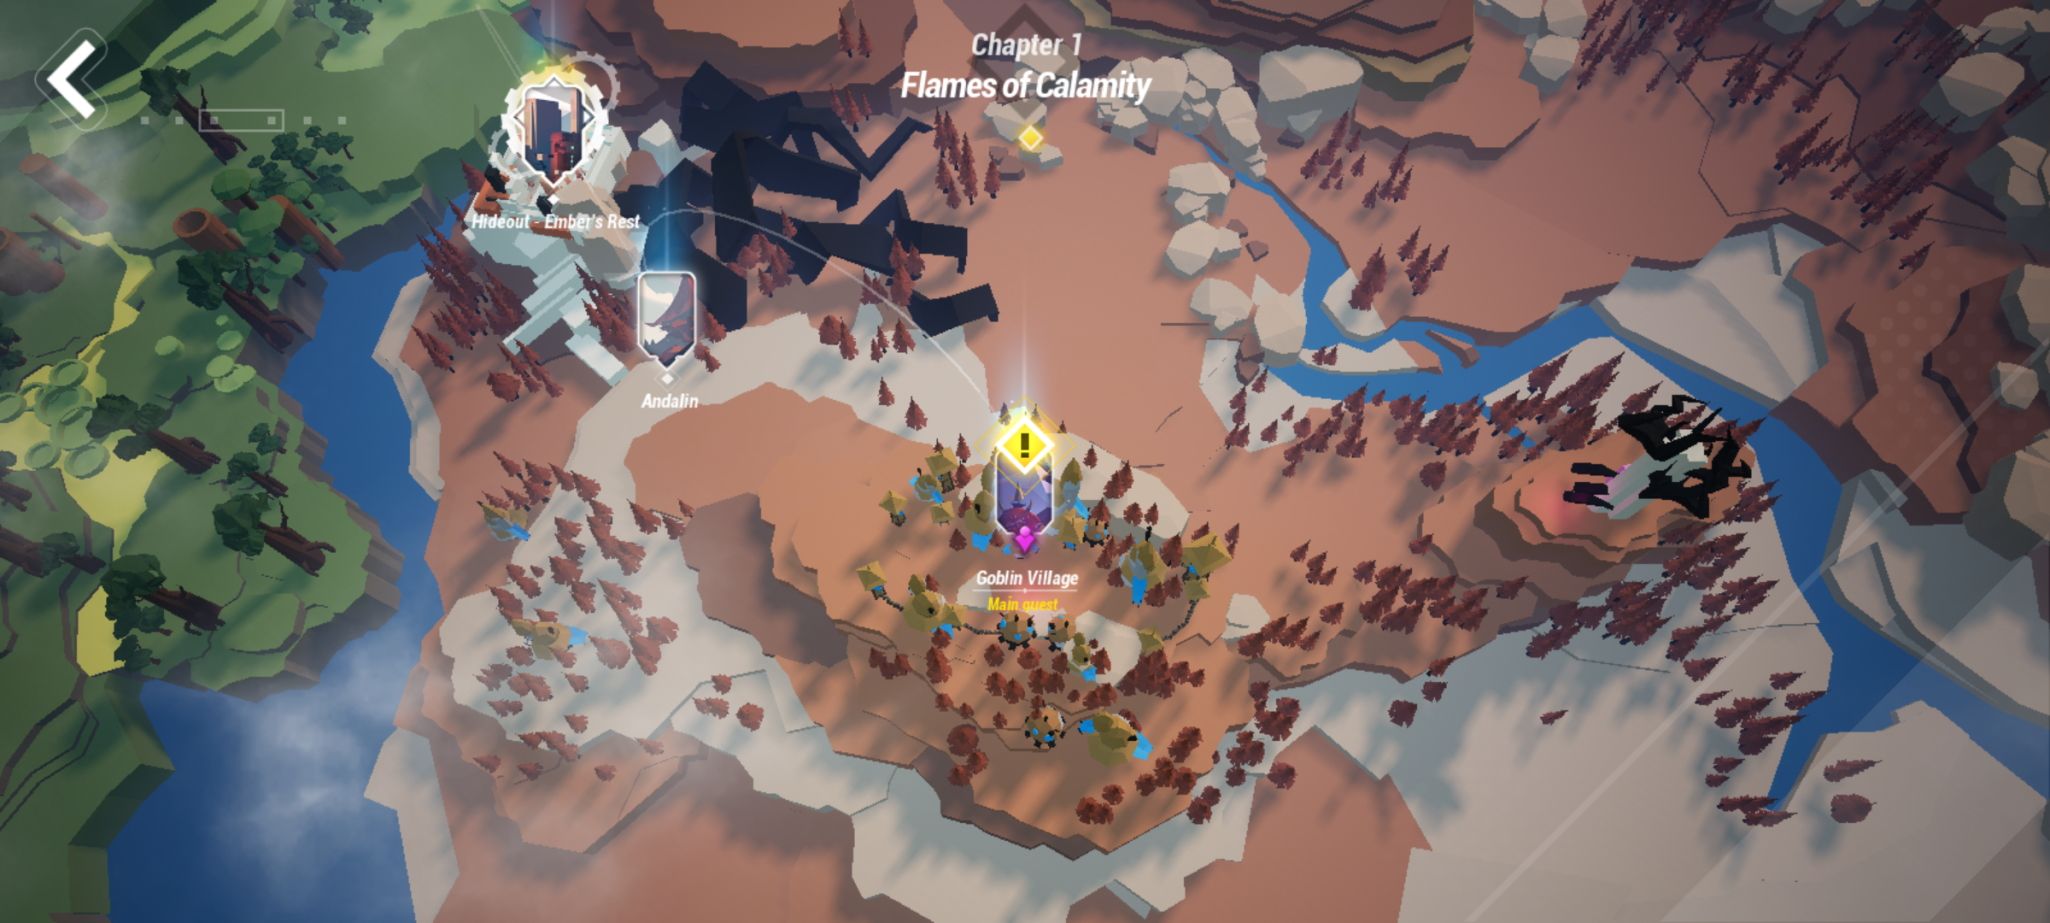 Displaying a world map in Torchlight: Infinite